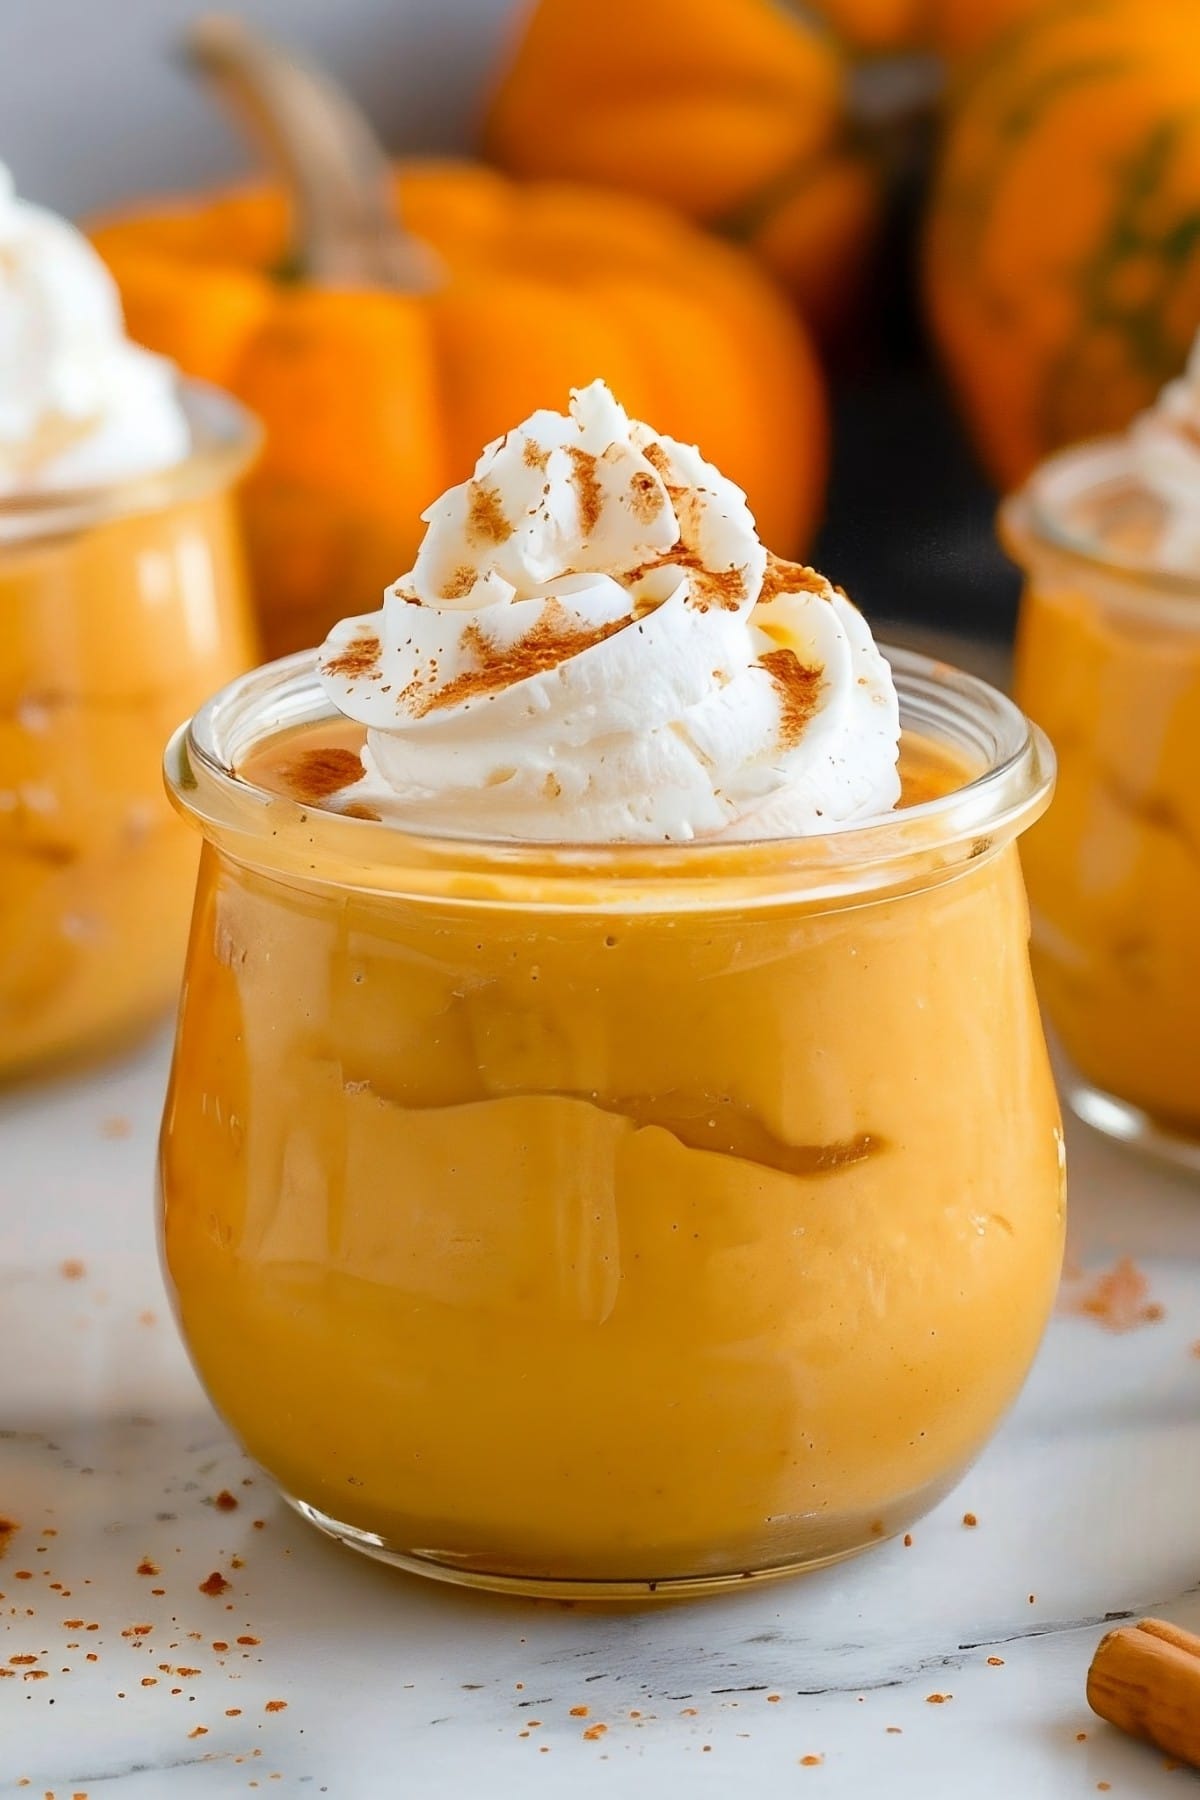 Fluffy and creamy homemade no-bake pumpkin mousse with whipped cream on top